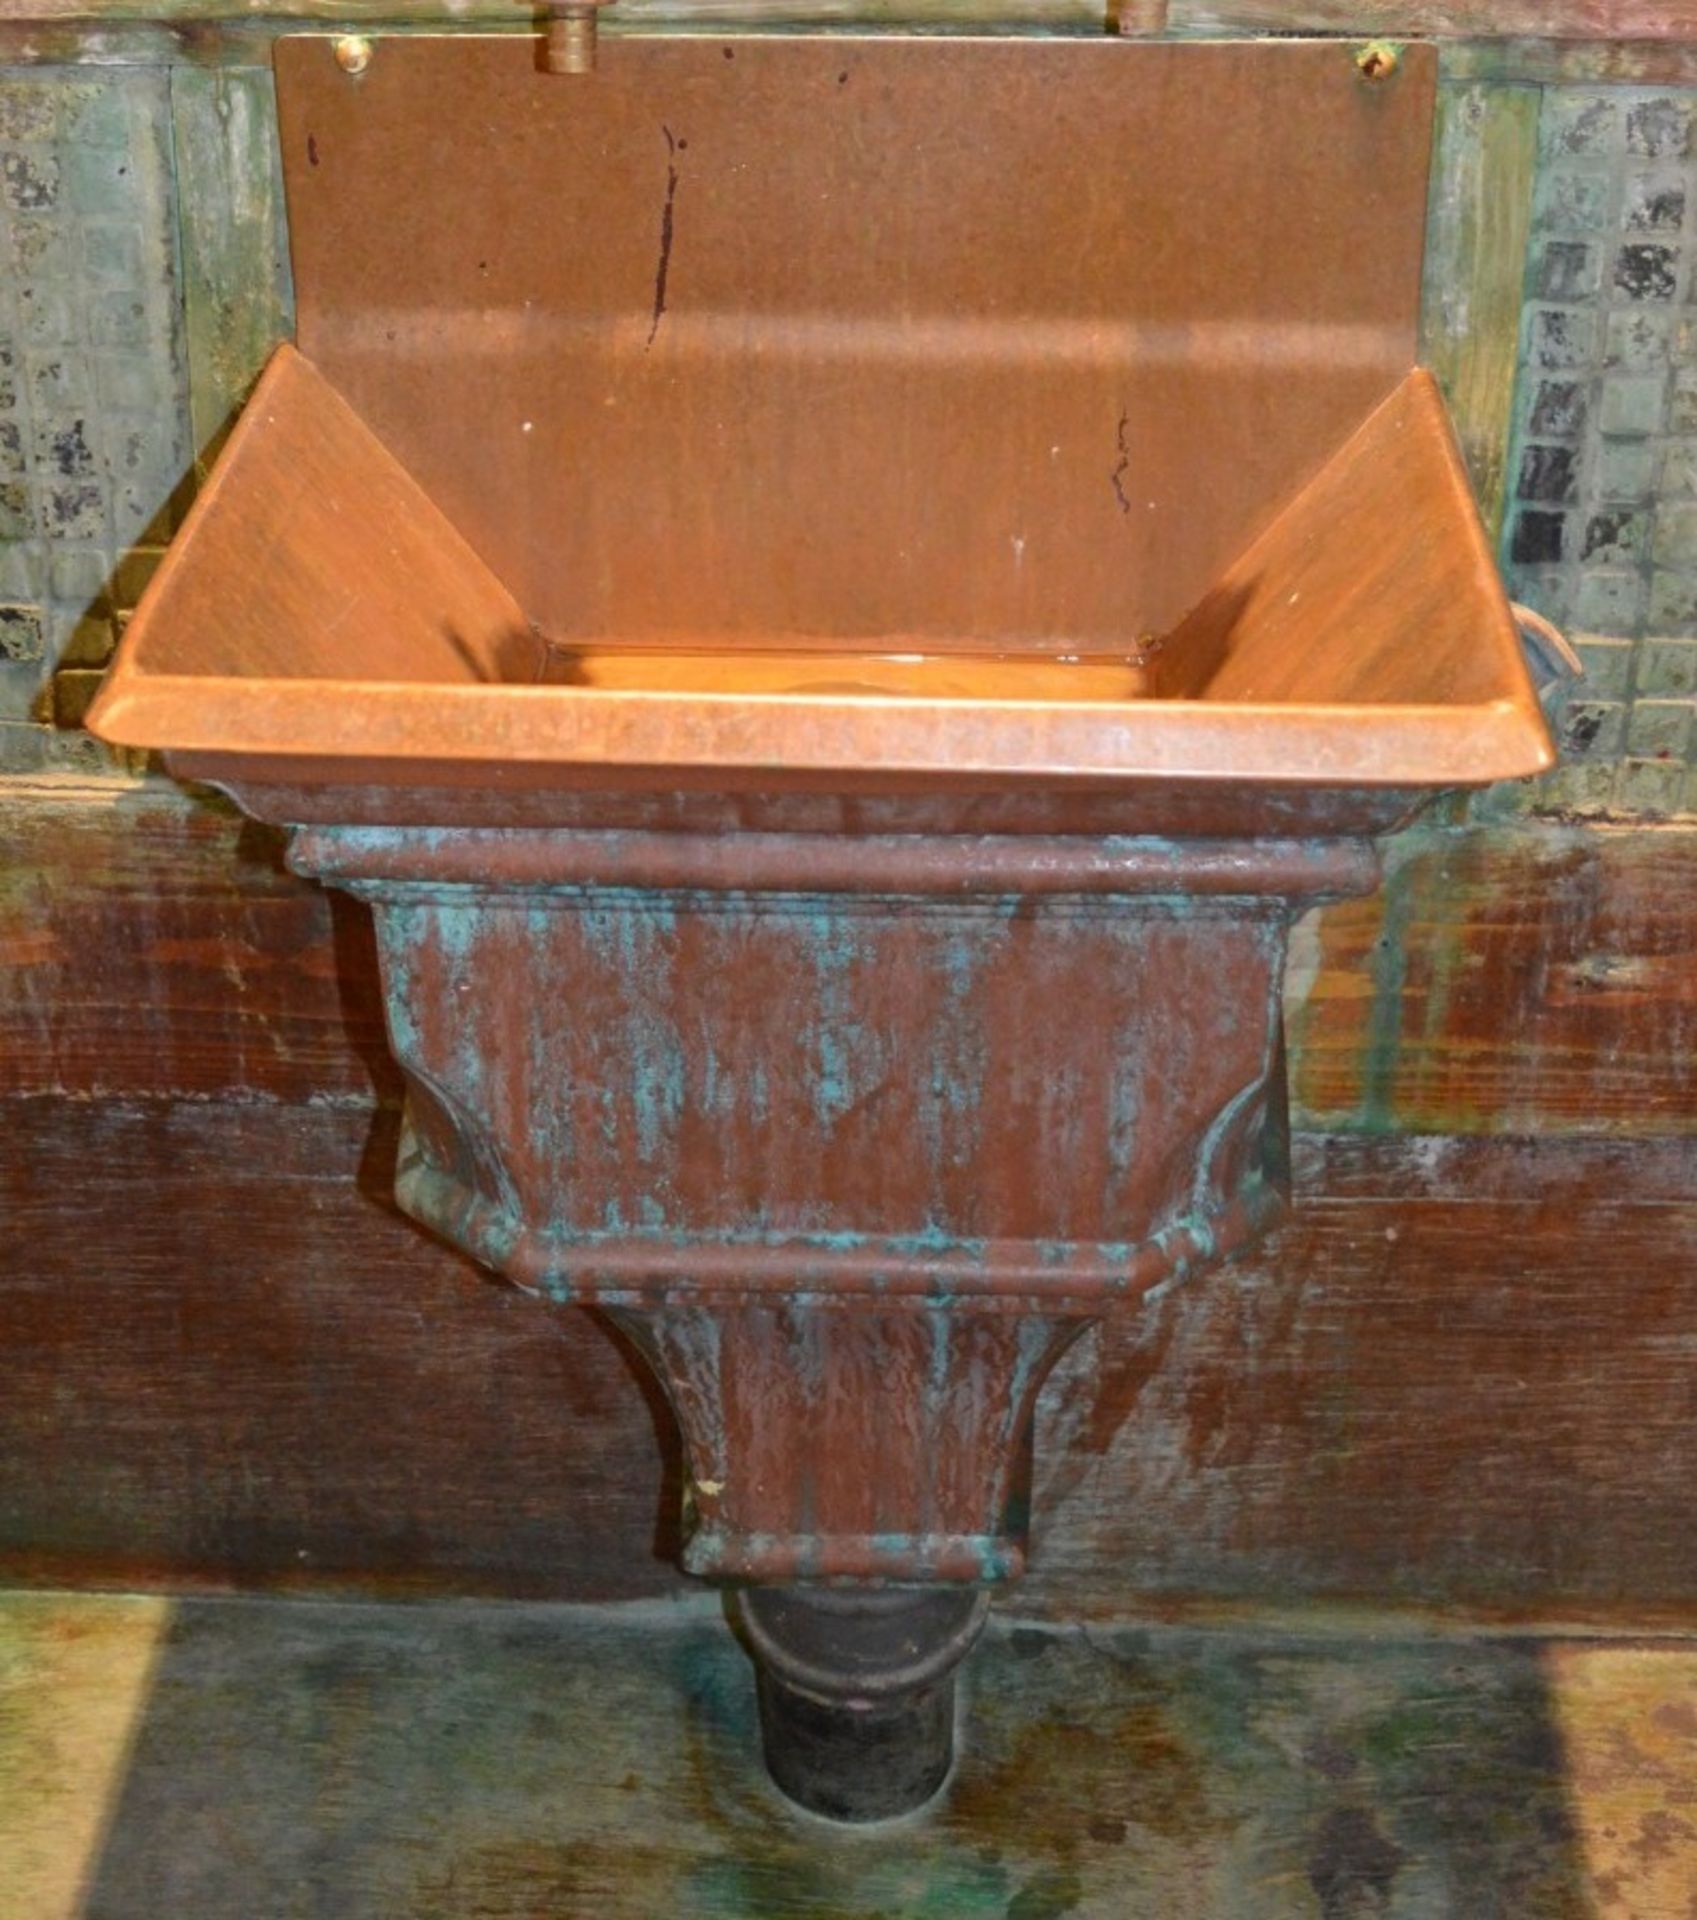 1 x Copper Gutter Leader Hopper Head - Customised Wall Mounted Sink Basin - This is a reclaimed